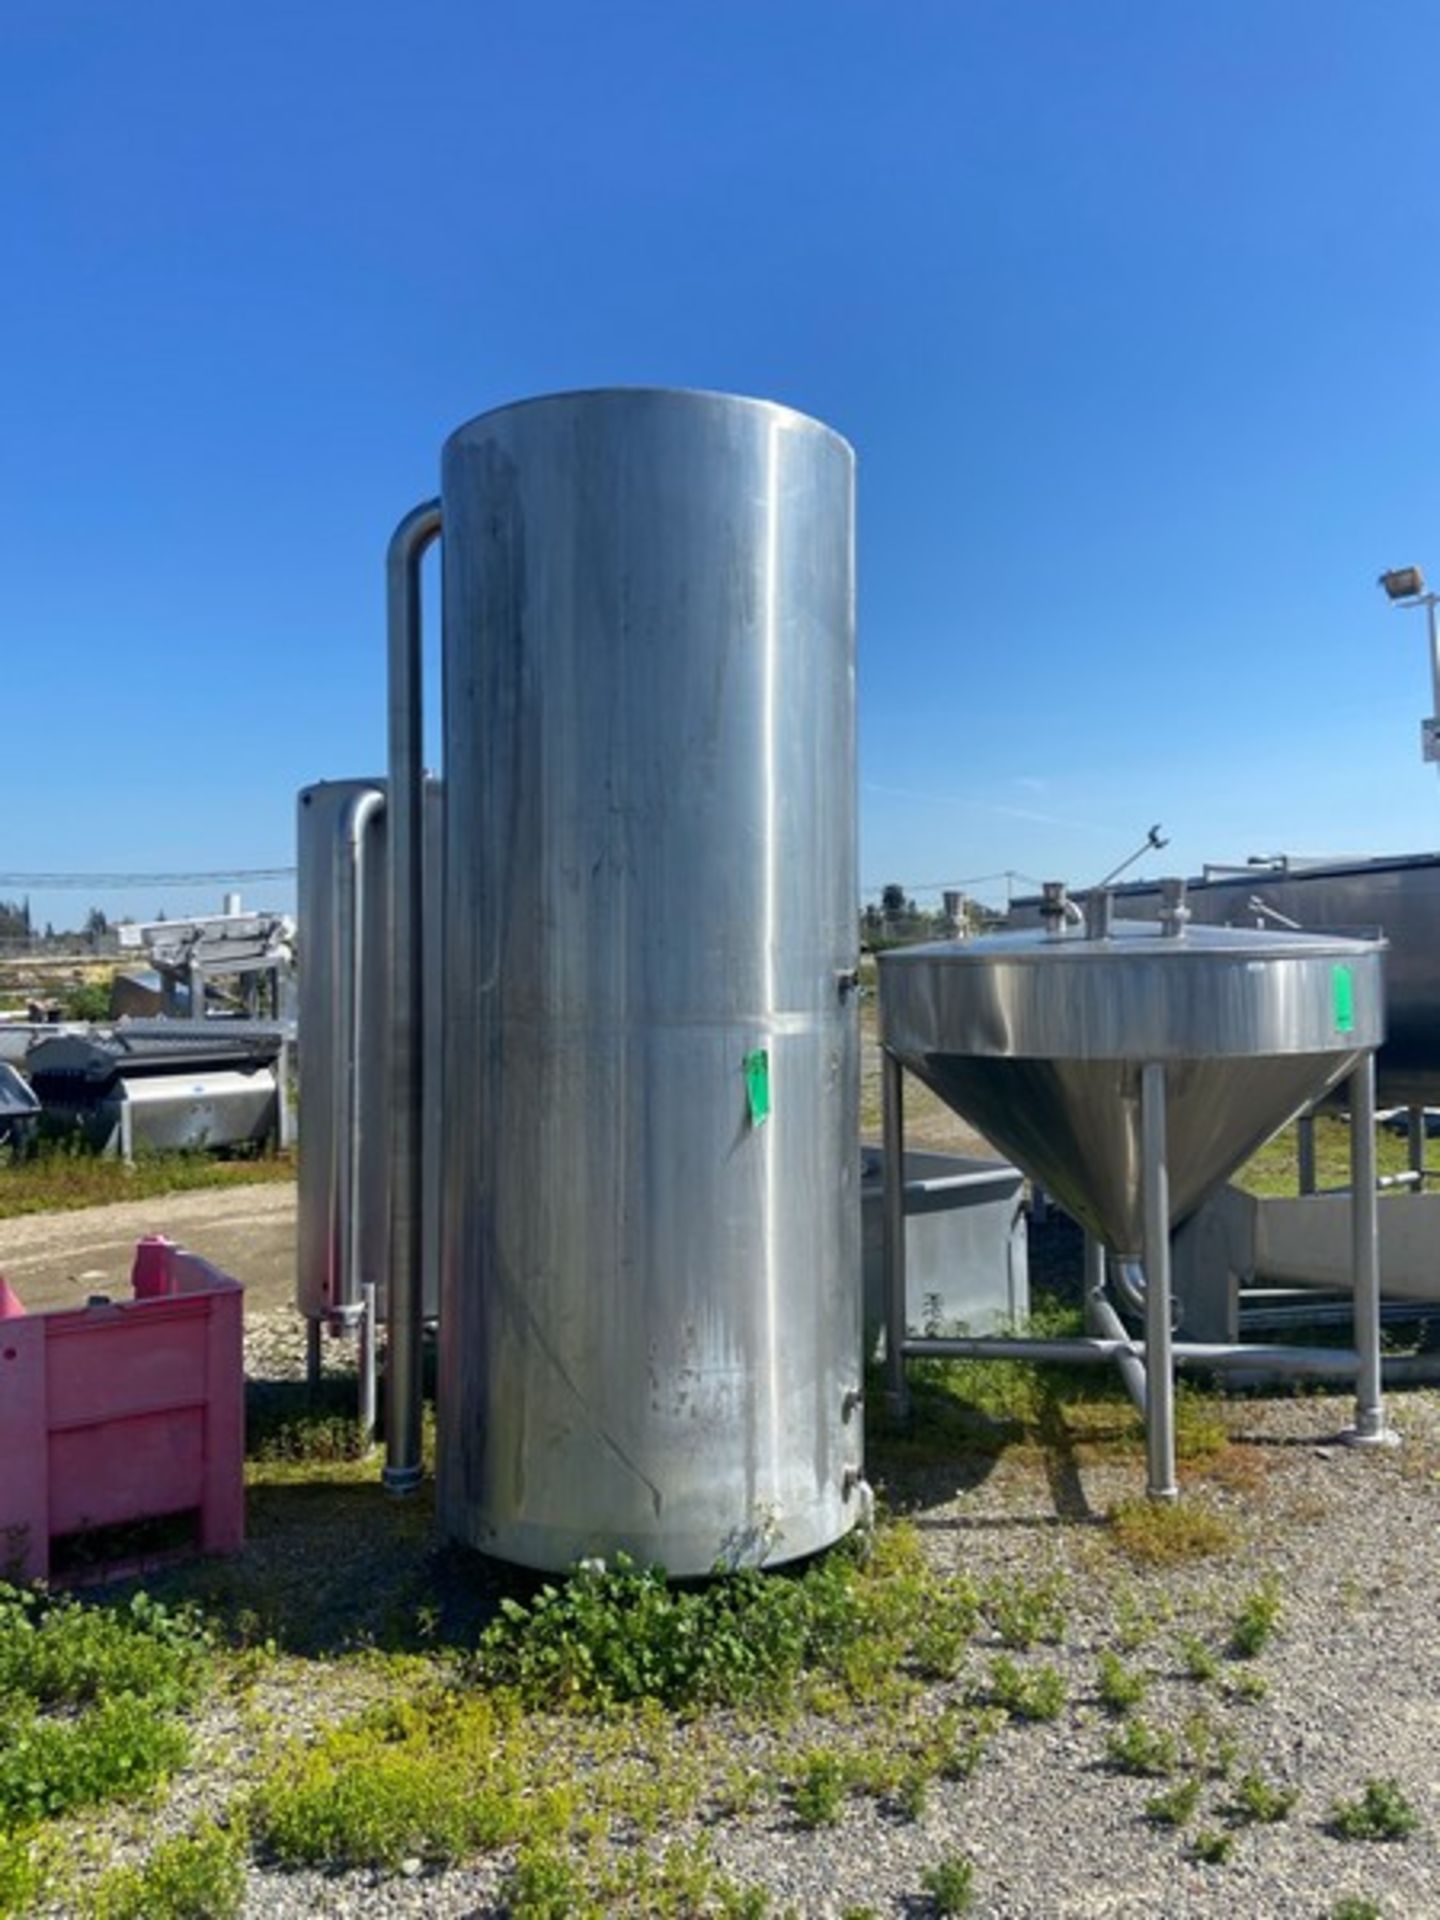 800 Gal. S/S Single Wall Vertical Tank, Dims.: 108" Tall x 48" Dia., with Slope Bottom (FRM184) (